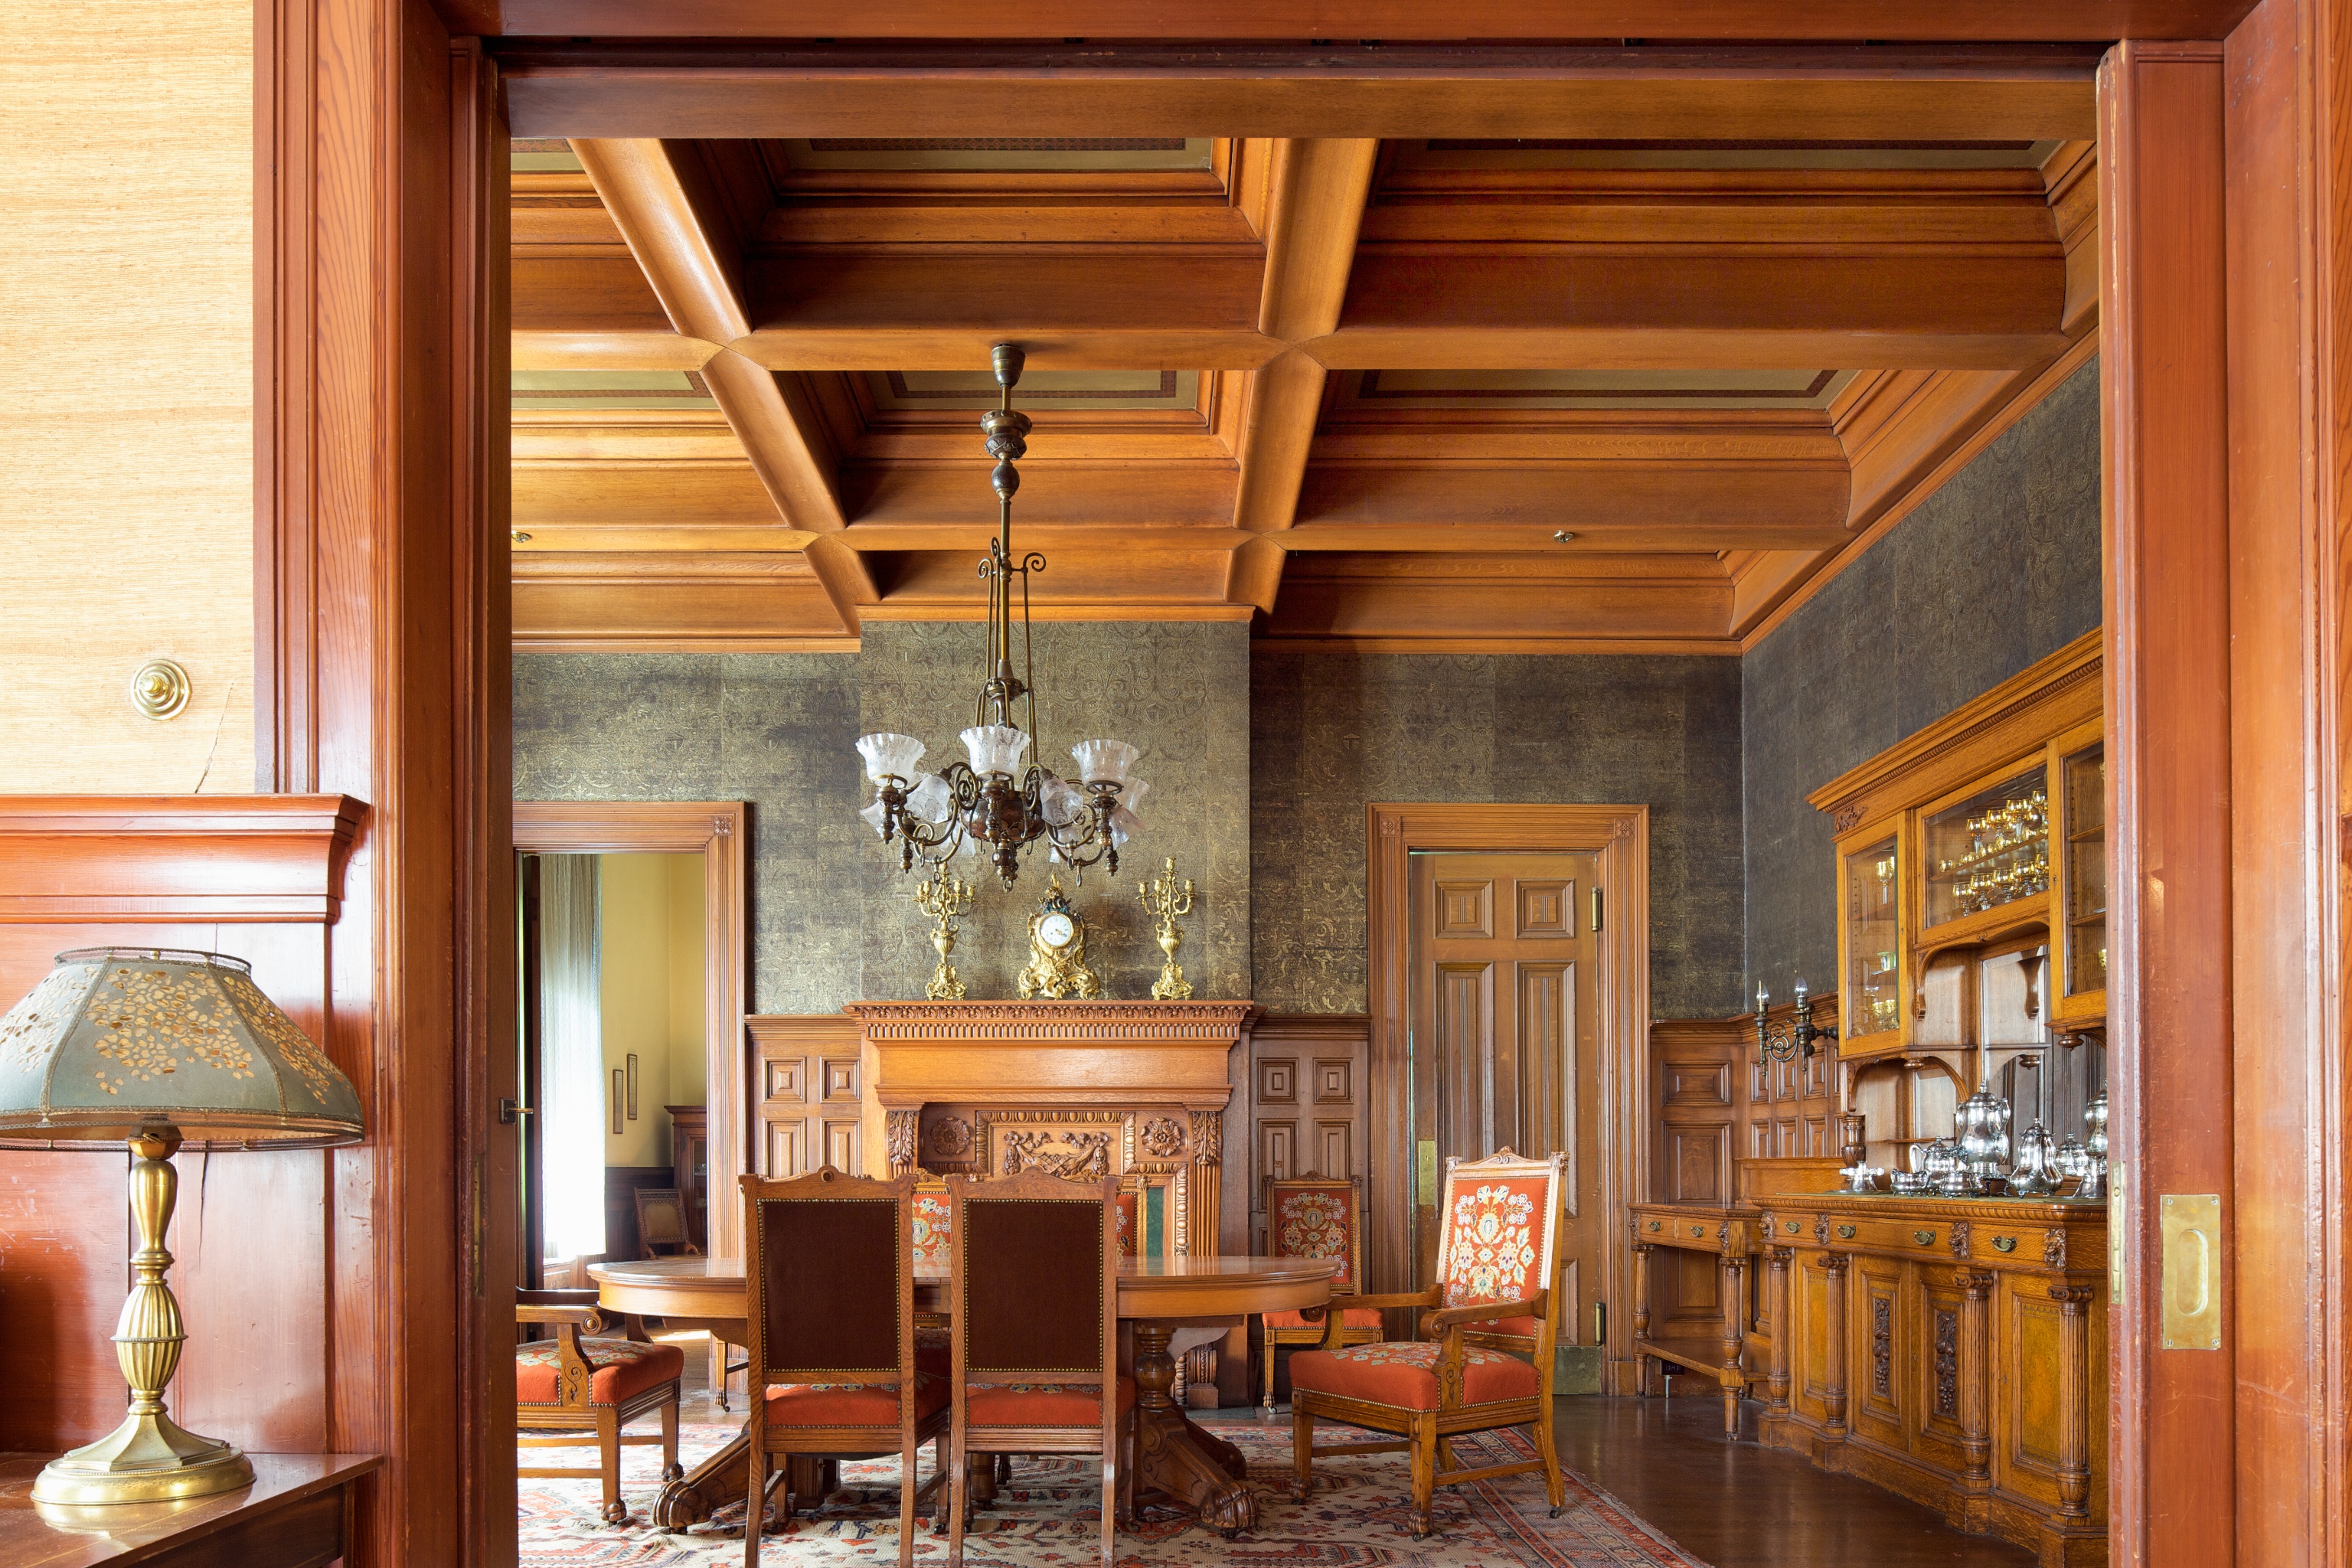 An elegant room with wood-paneled walls, coffered ceiling, antique furniture, and a chandelier.